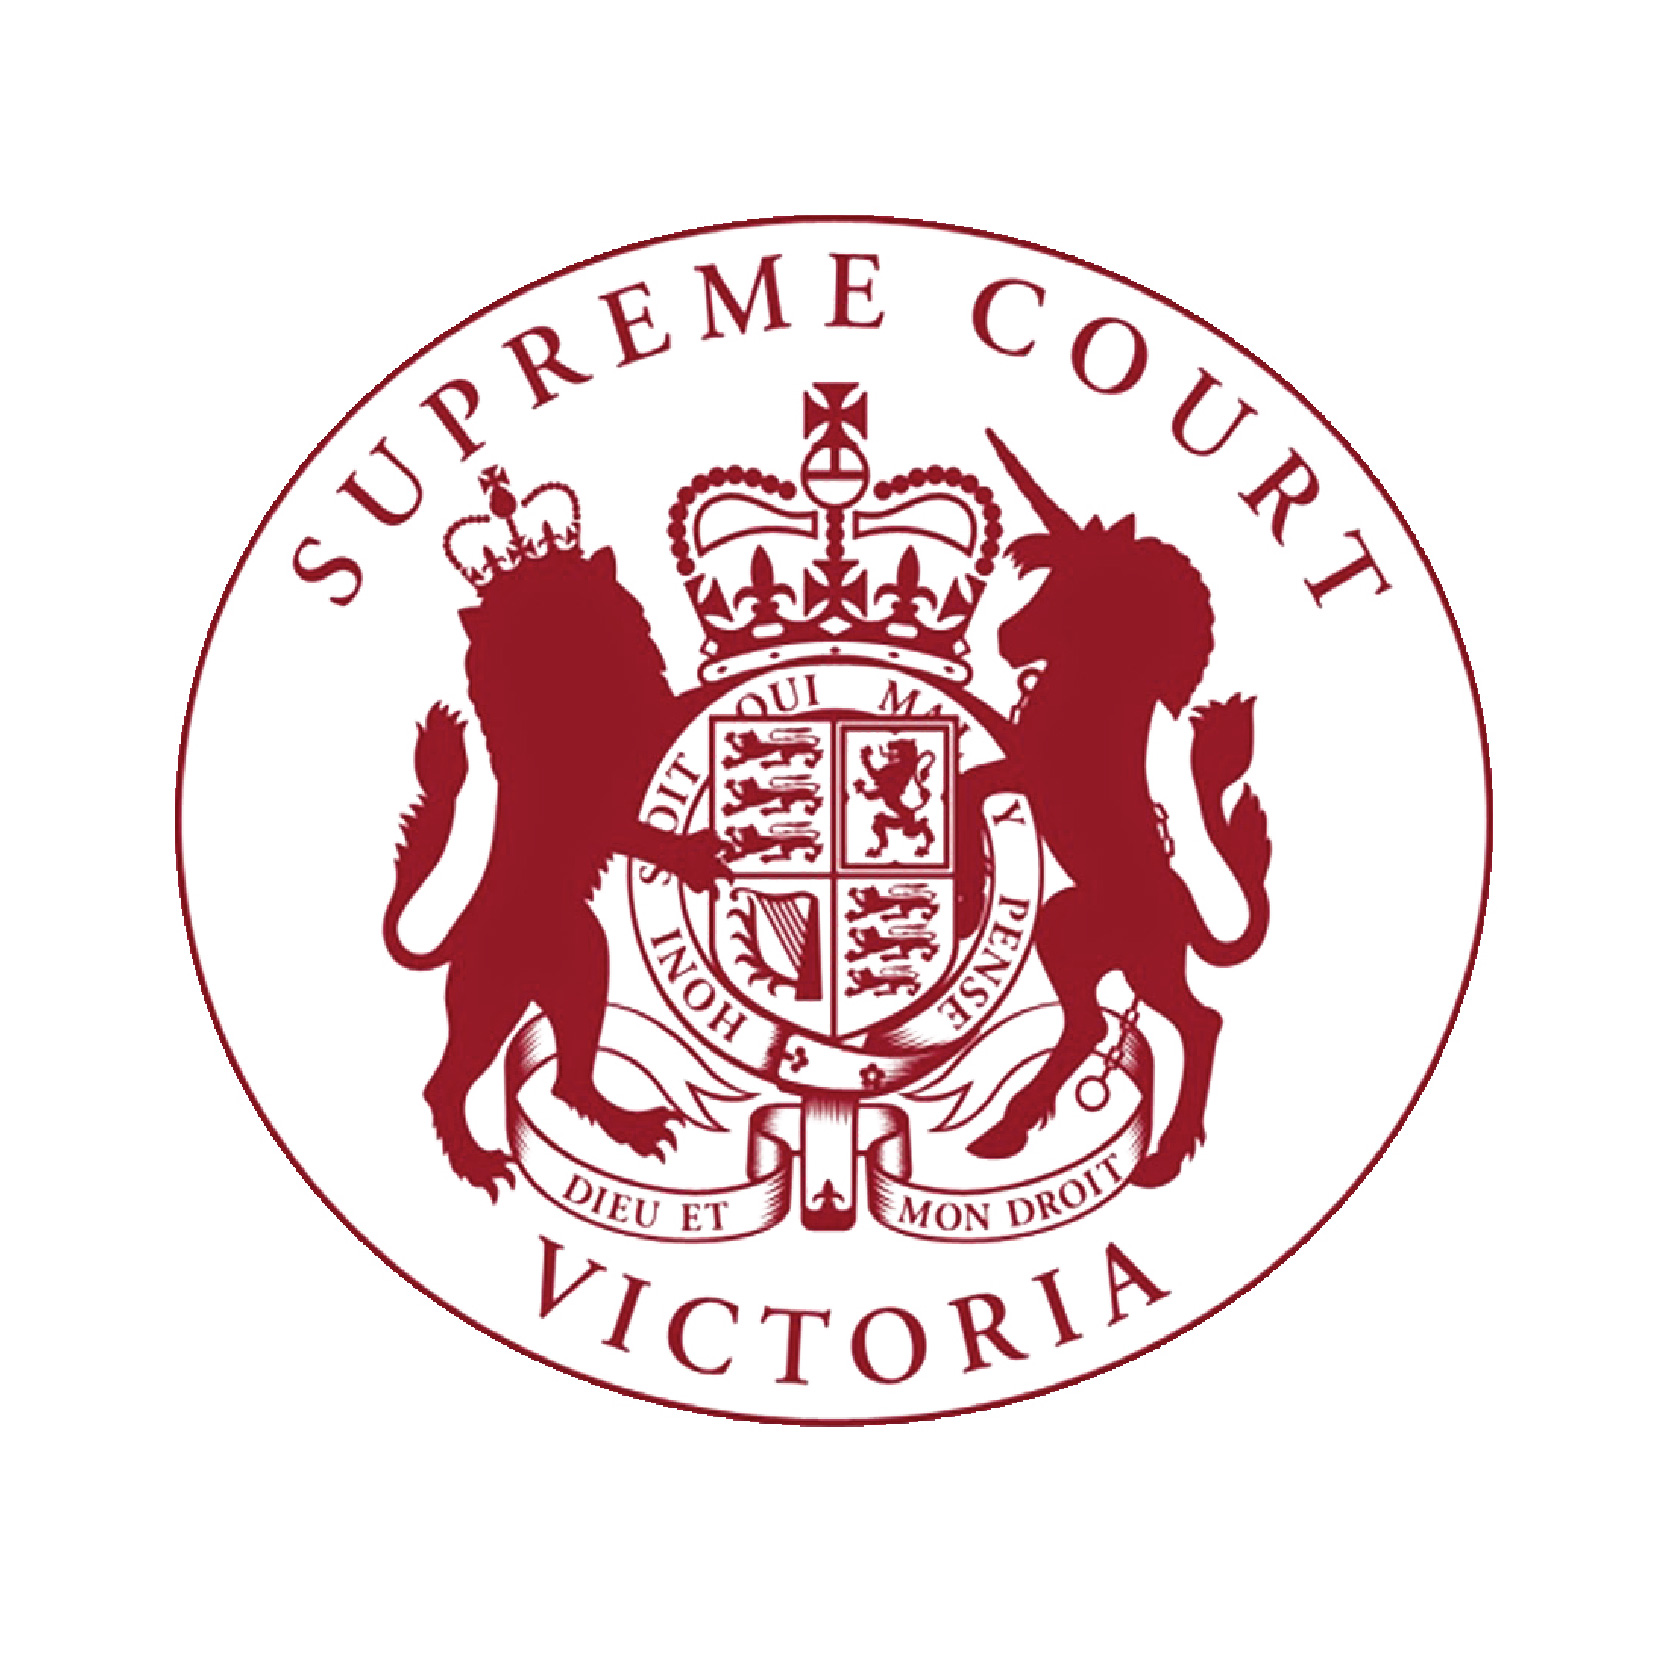 Our clients include household Australian names such as the Supreme Court Victoria